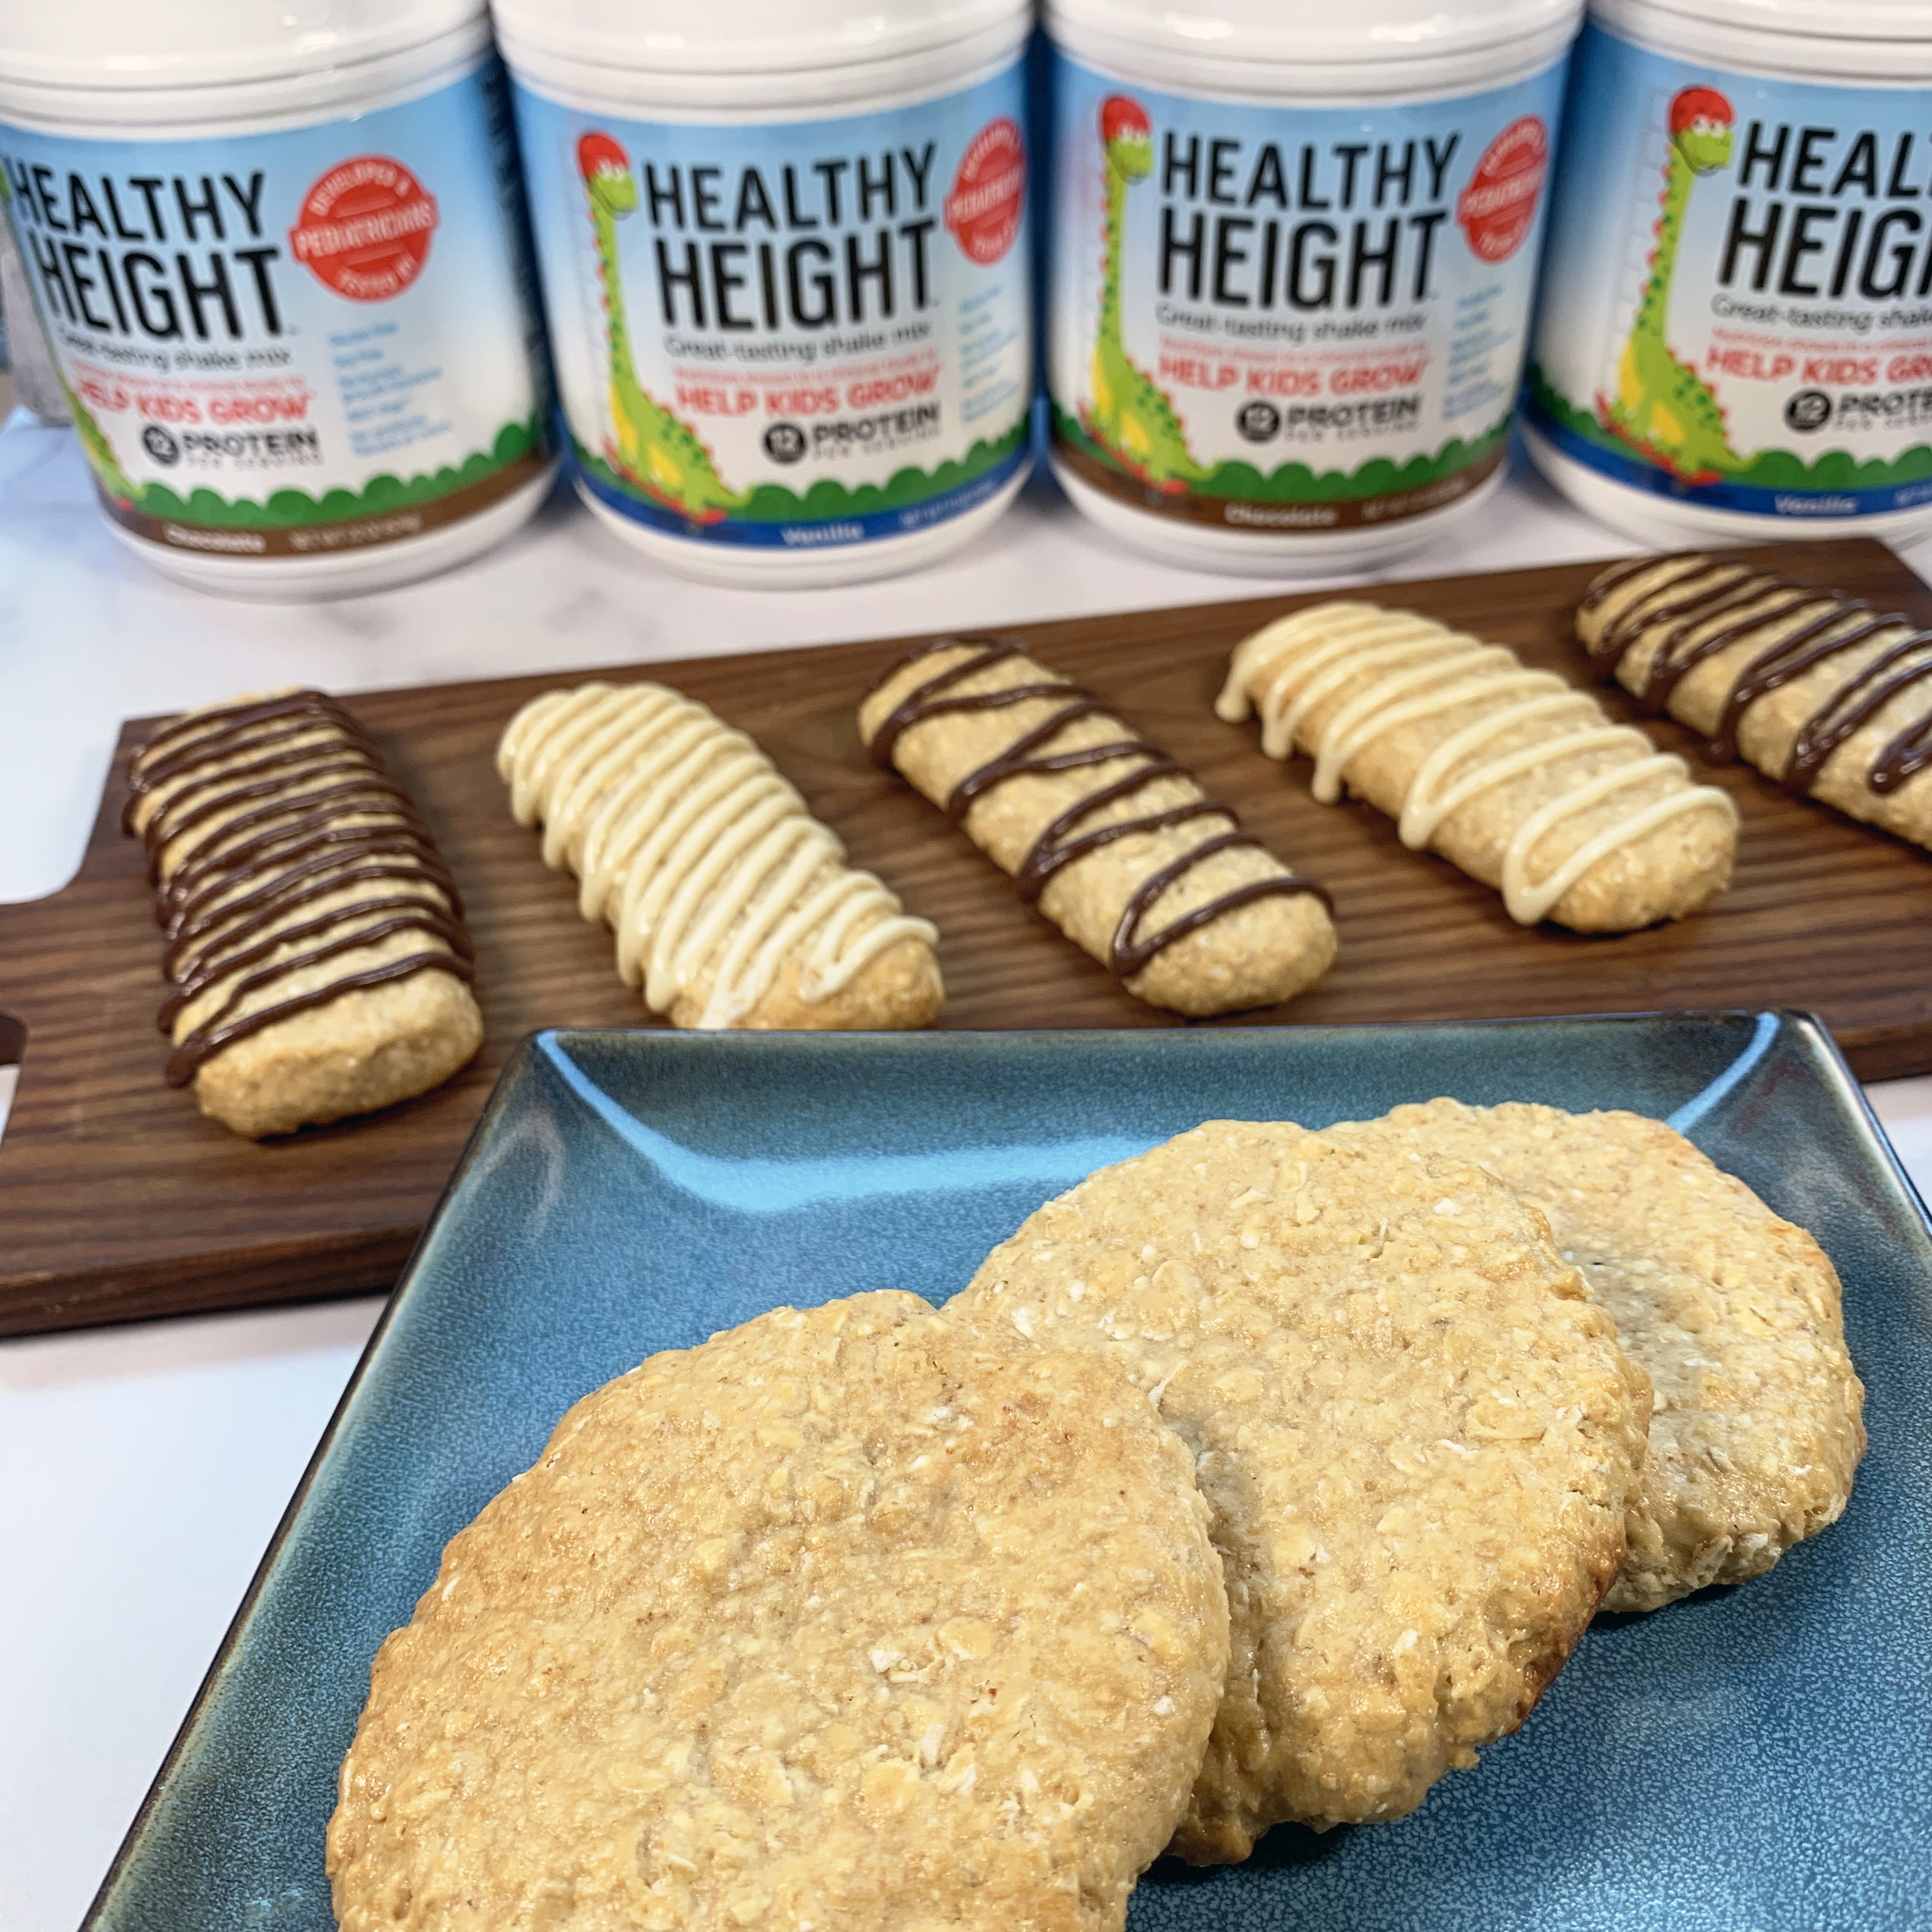 Healthy Height Oatmeal Cookies by The Allergy Chef